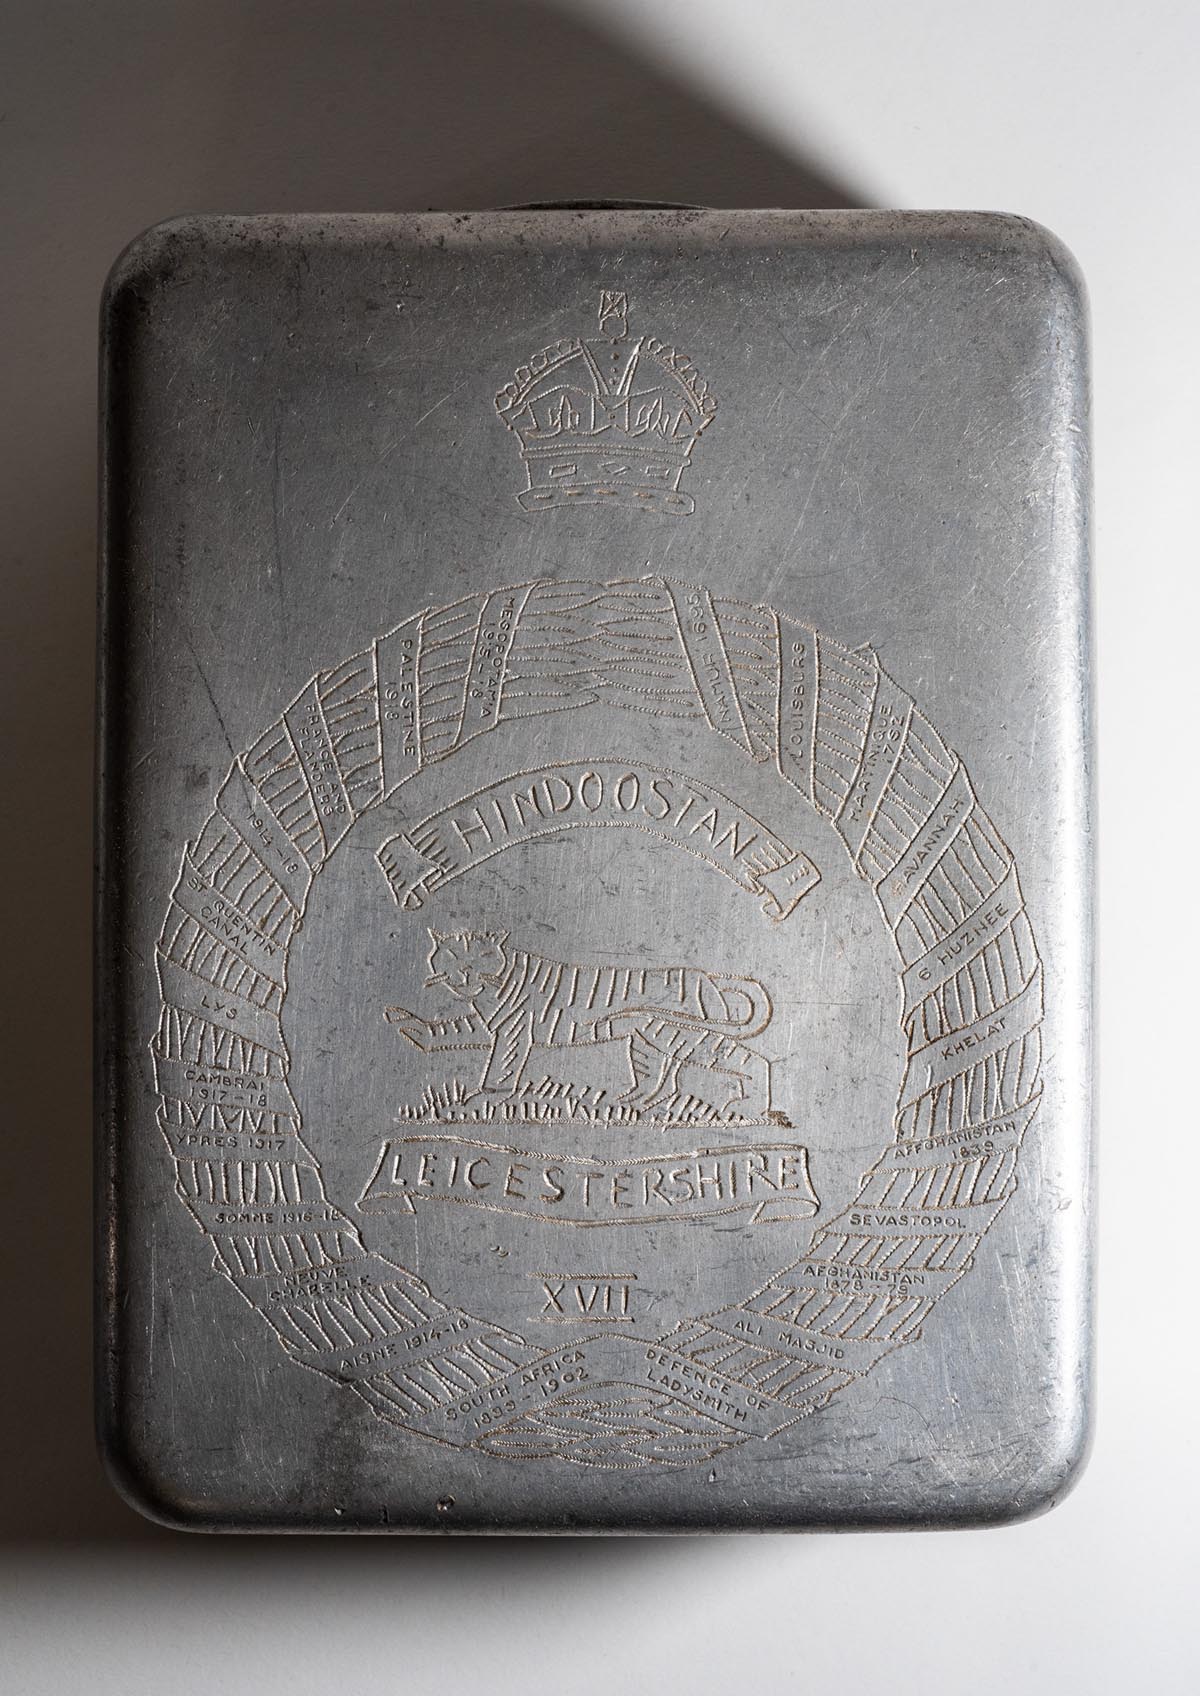 Mess tin engraved with the Regimental crest on the base, by Major Dobson while a prisoner of war in Thailand.